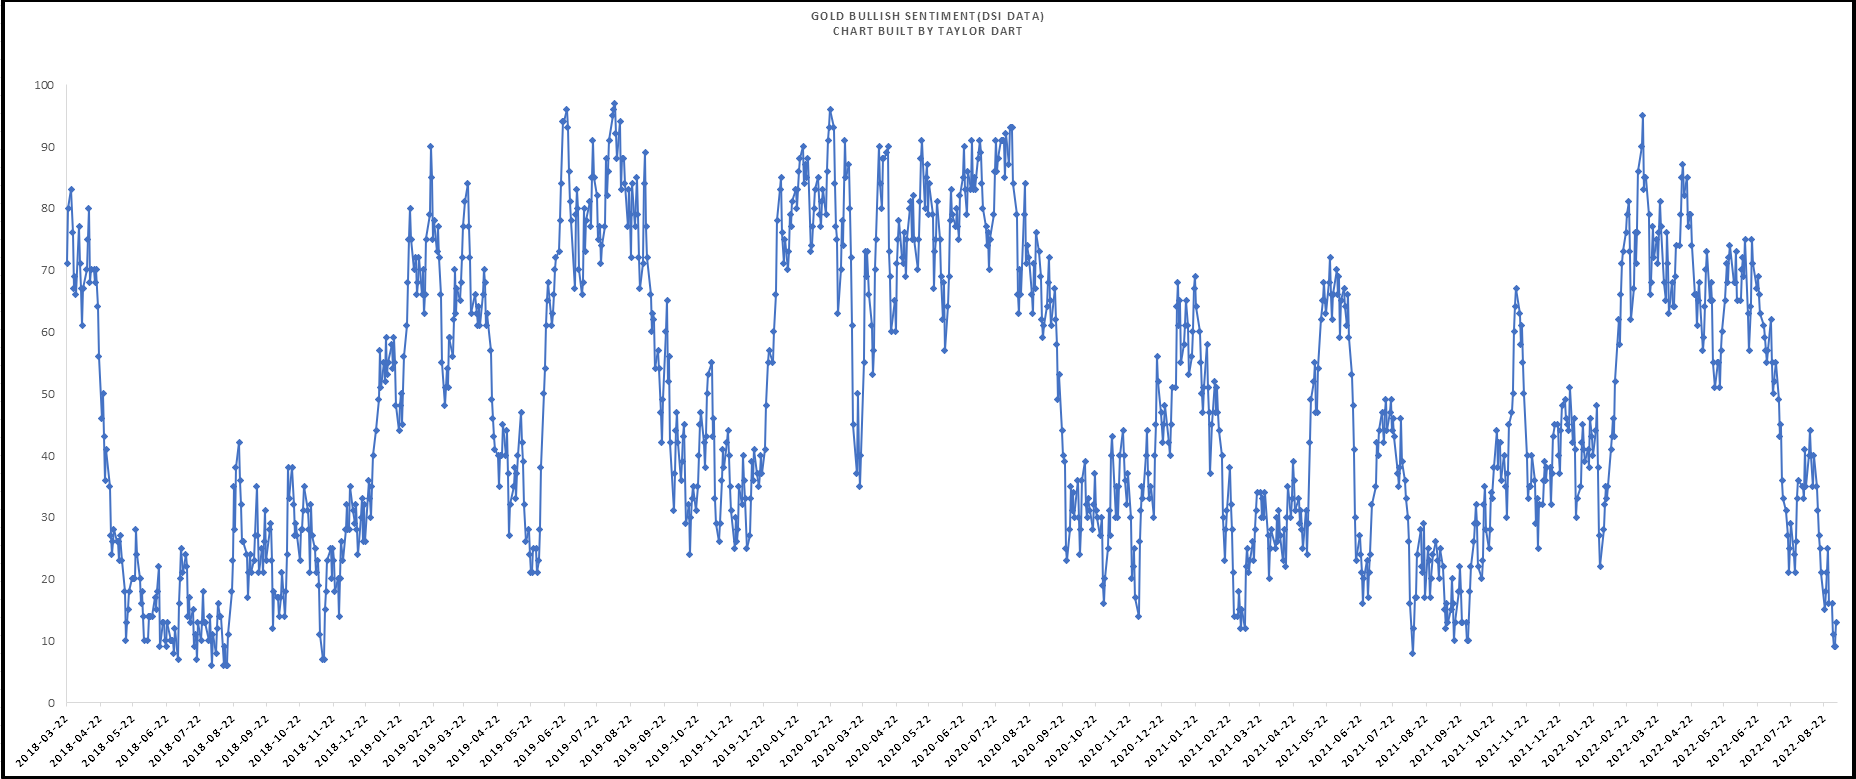 Daily Sentiment Index Data